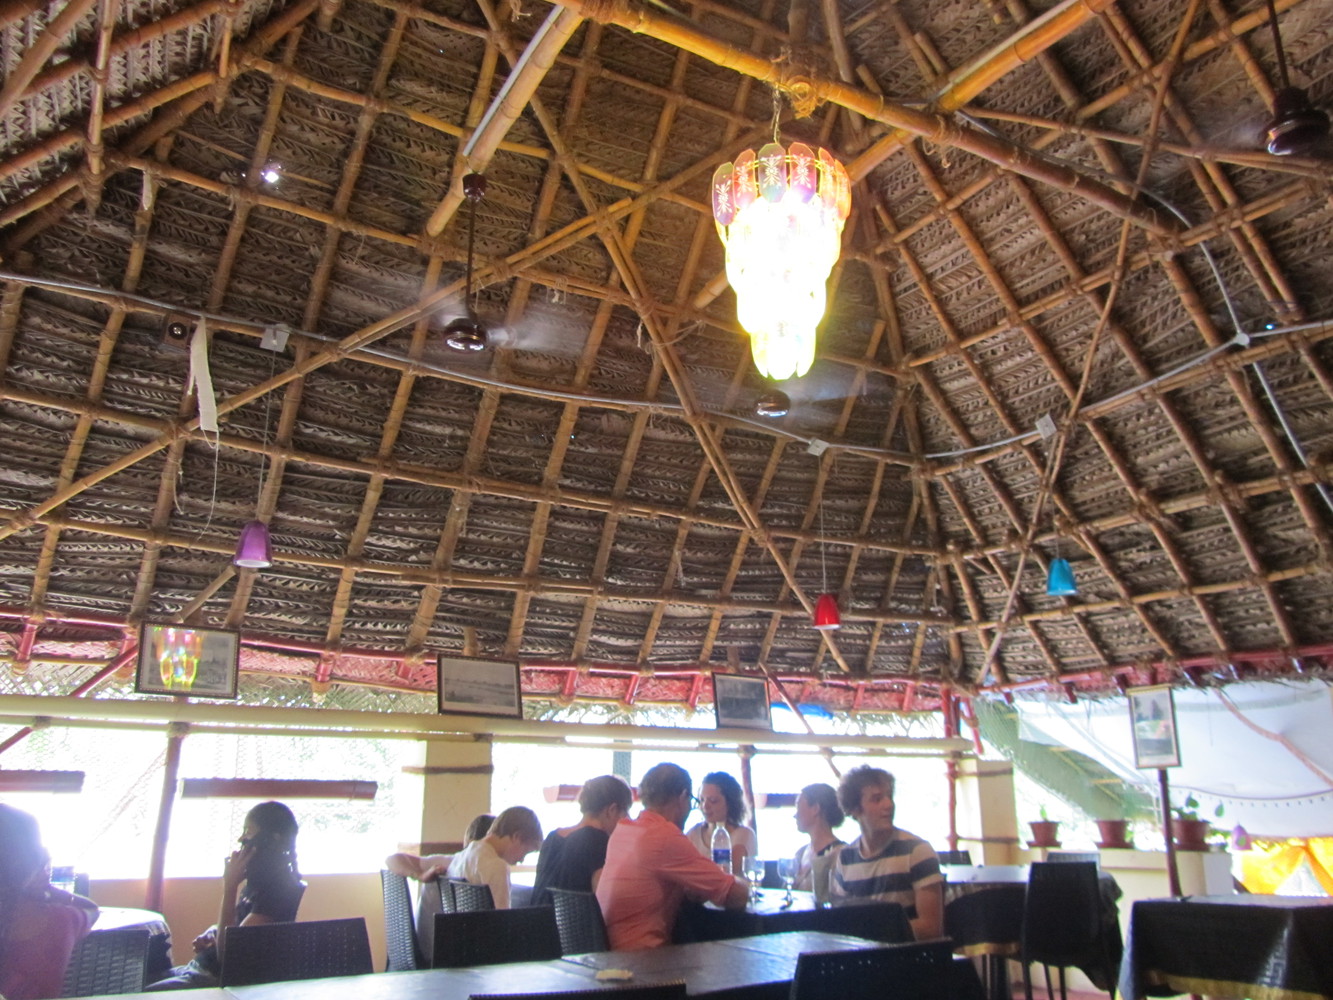 A rooftop restaurant with thatched ceiling, tables, and diners